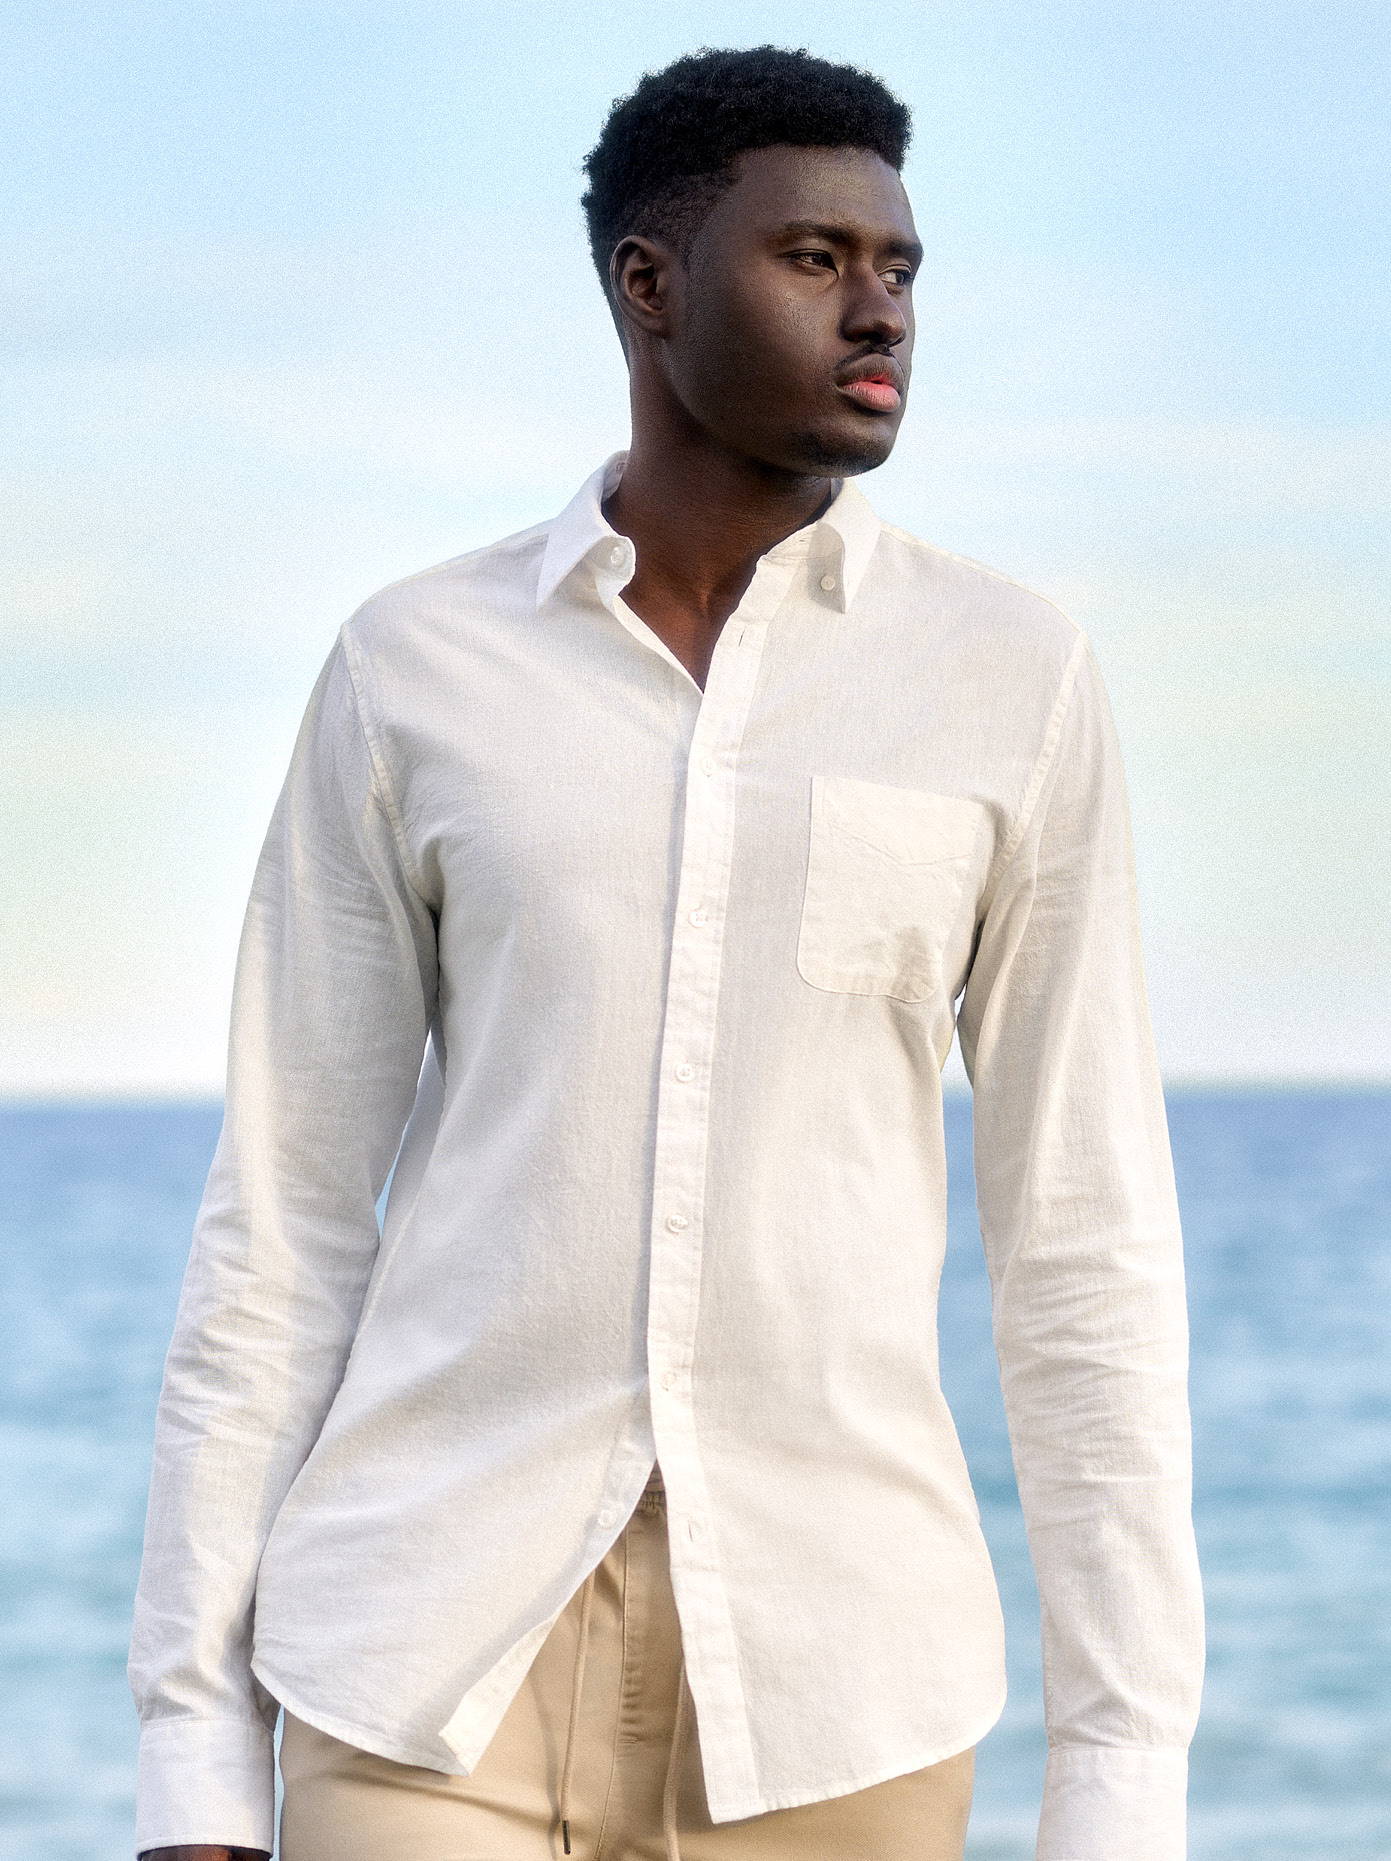 Tall man wearing a white linen shirt by the water